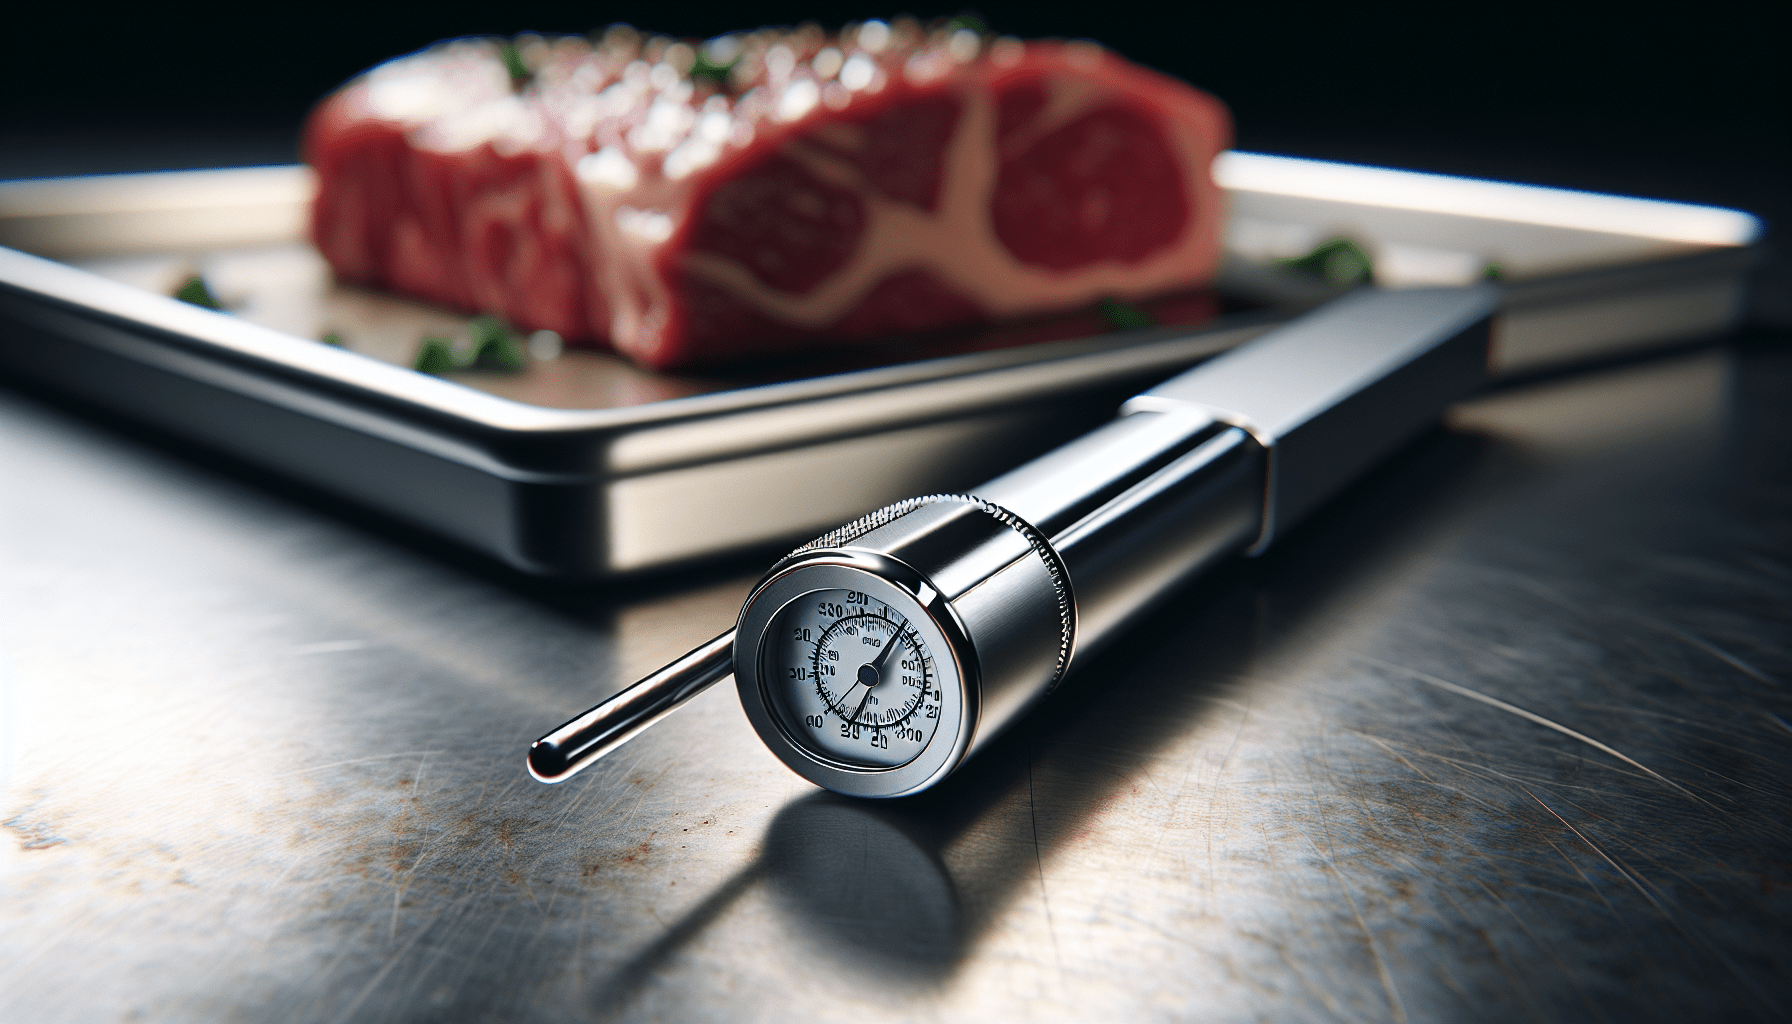 Calibrating Meat Thermometer